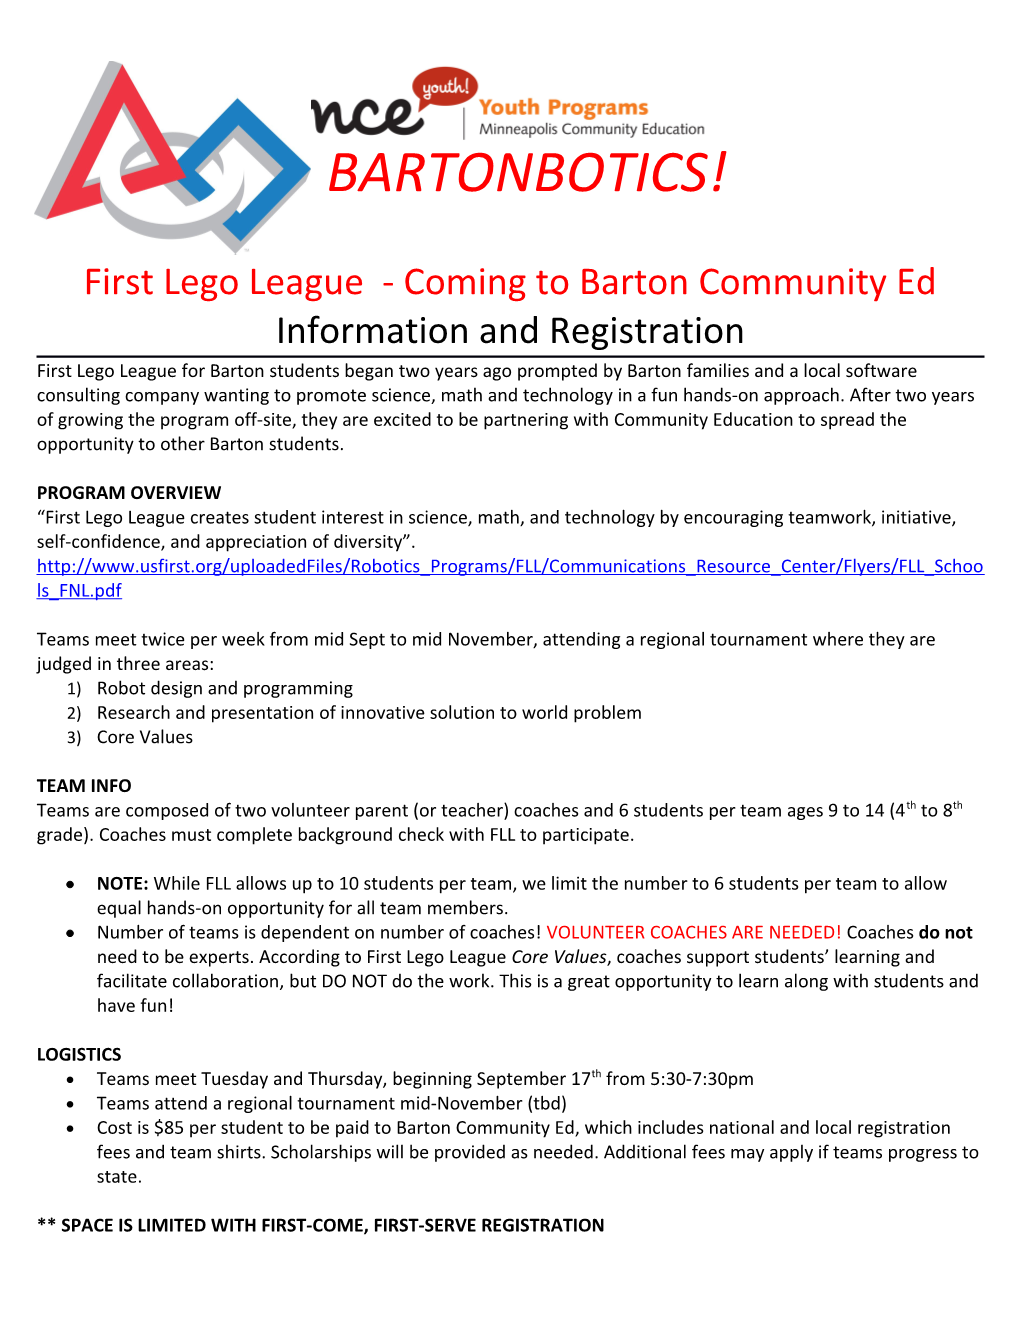 First Lego League - Coming to Barton Community Ed